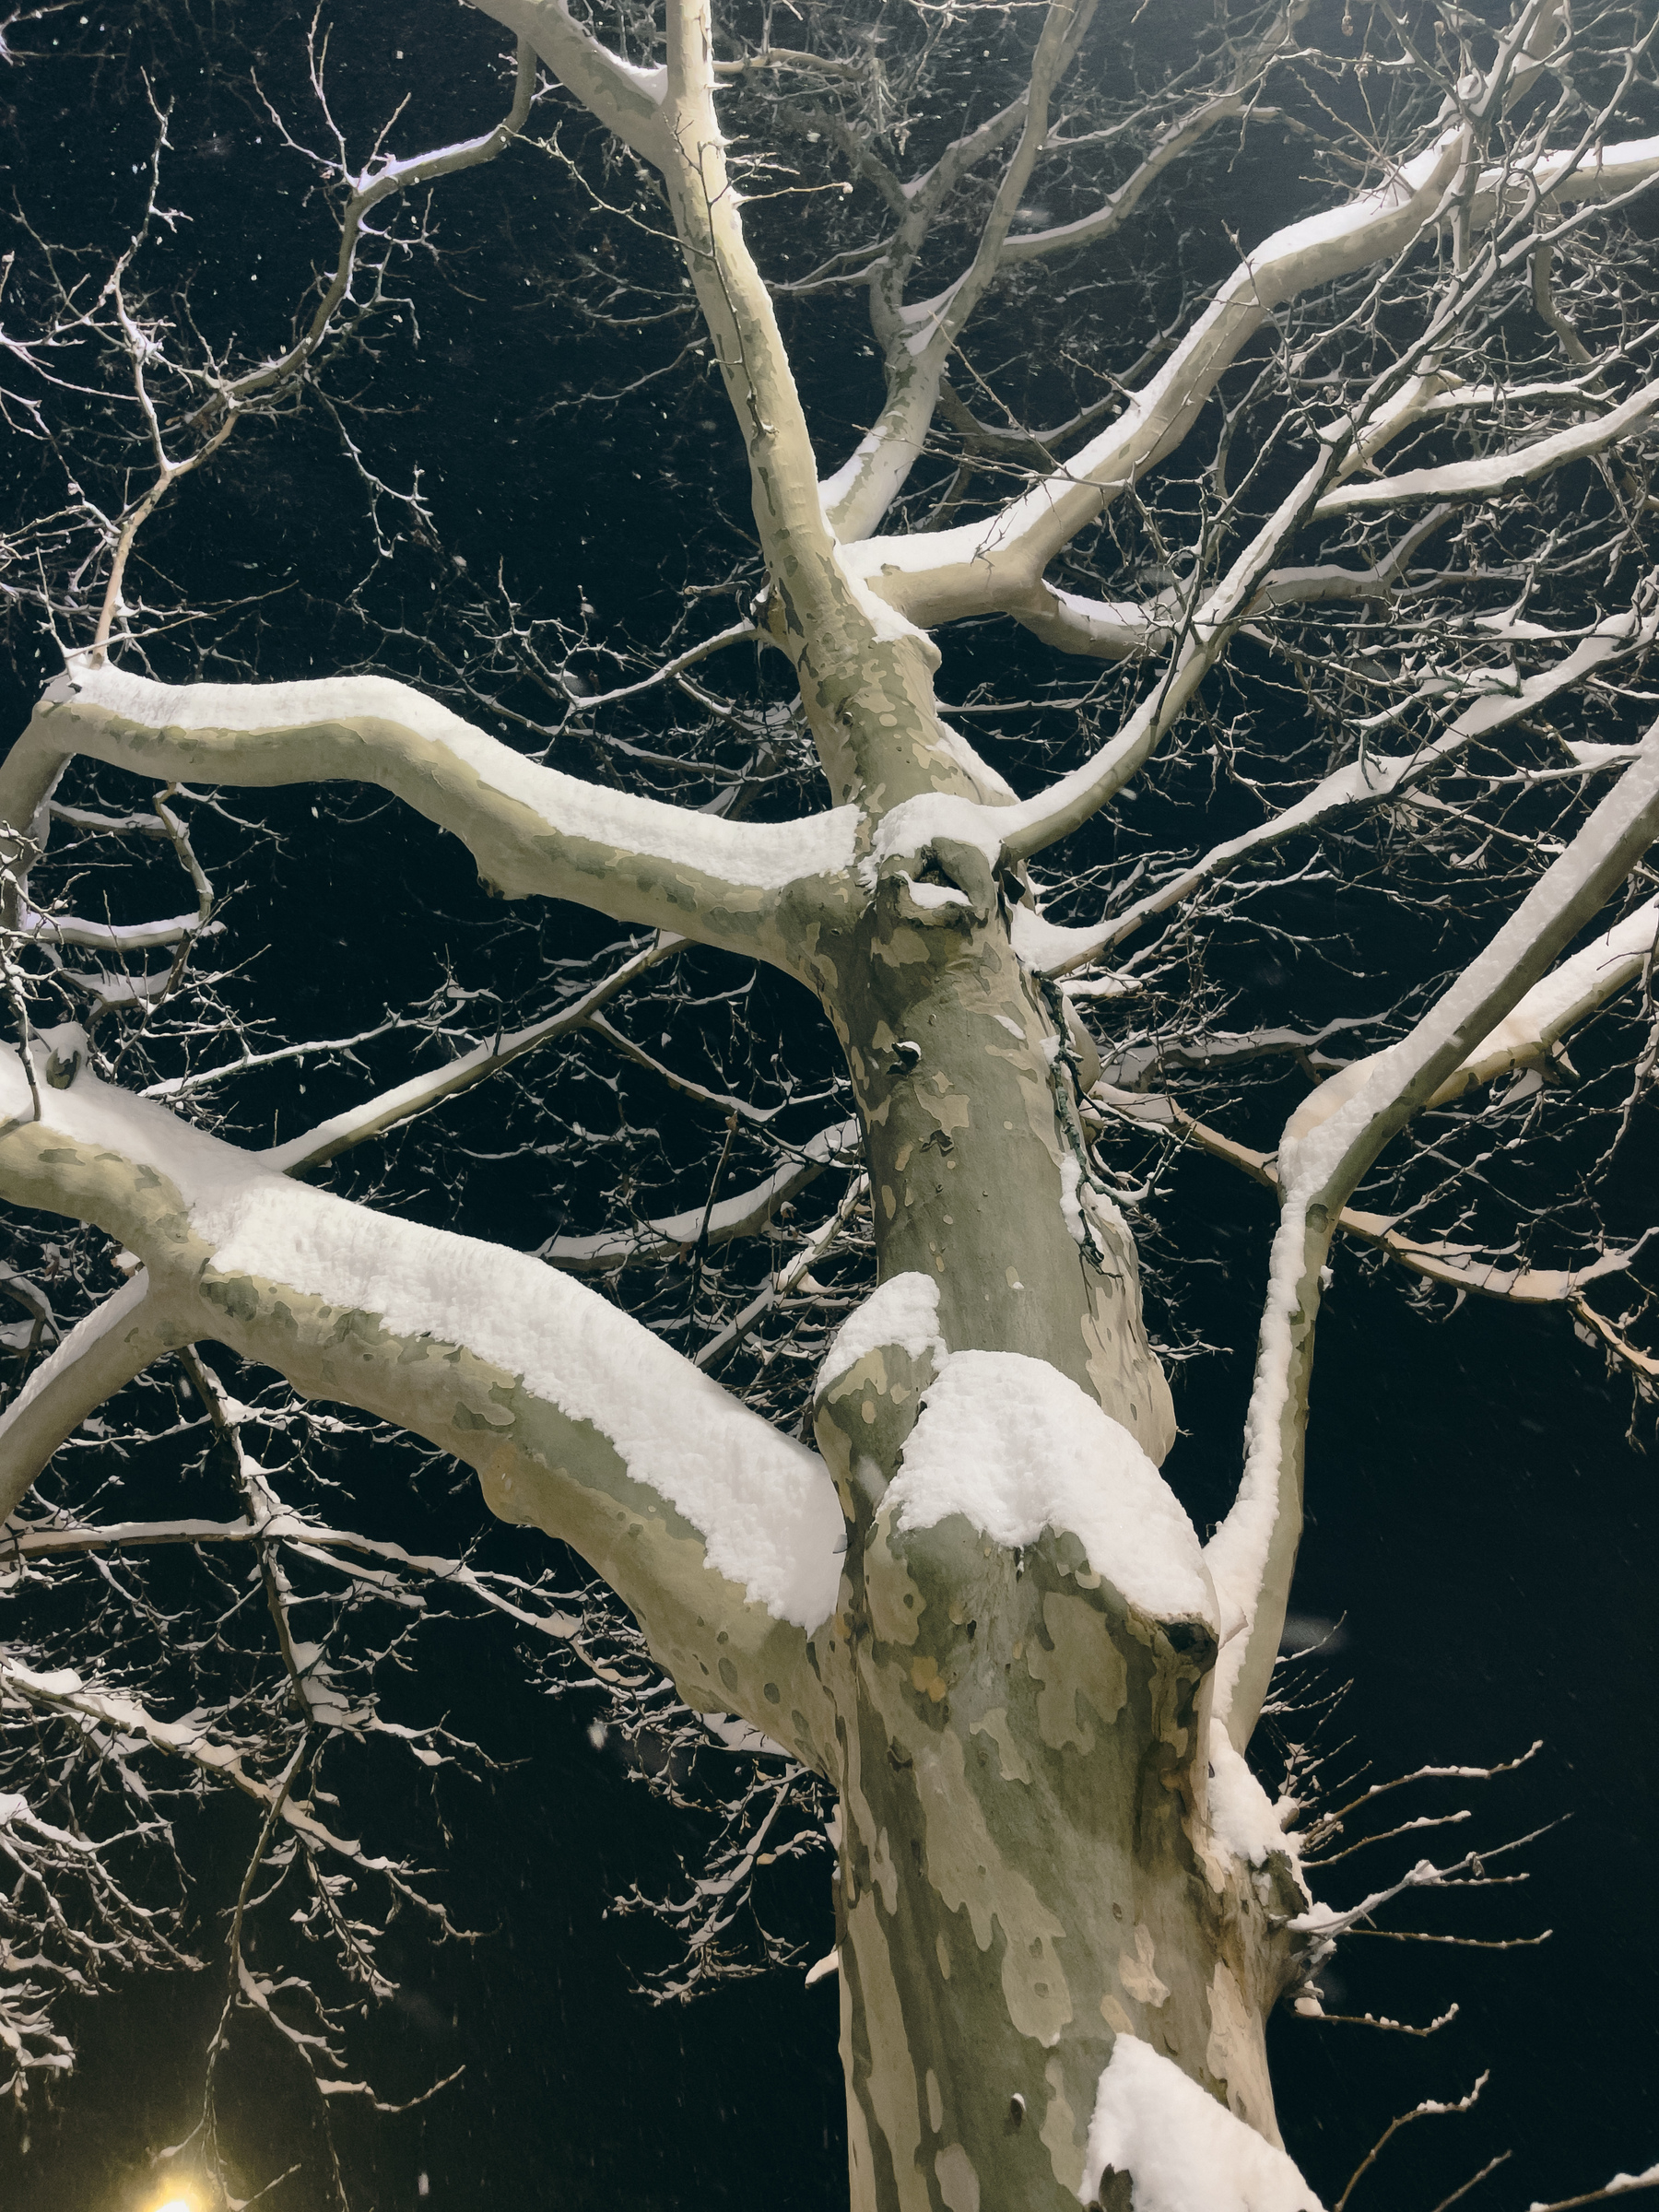 Tree with snow on the branches before dawn illuminated by streetlights.